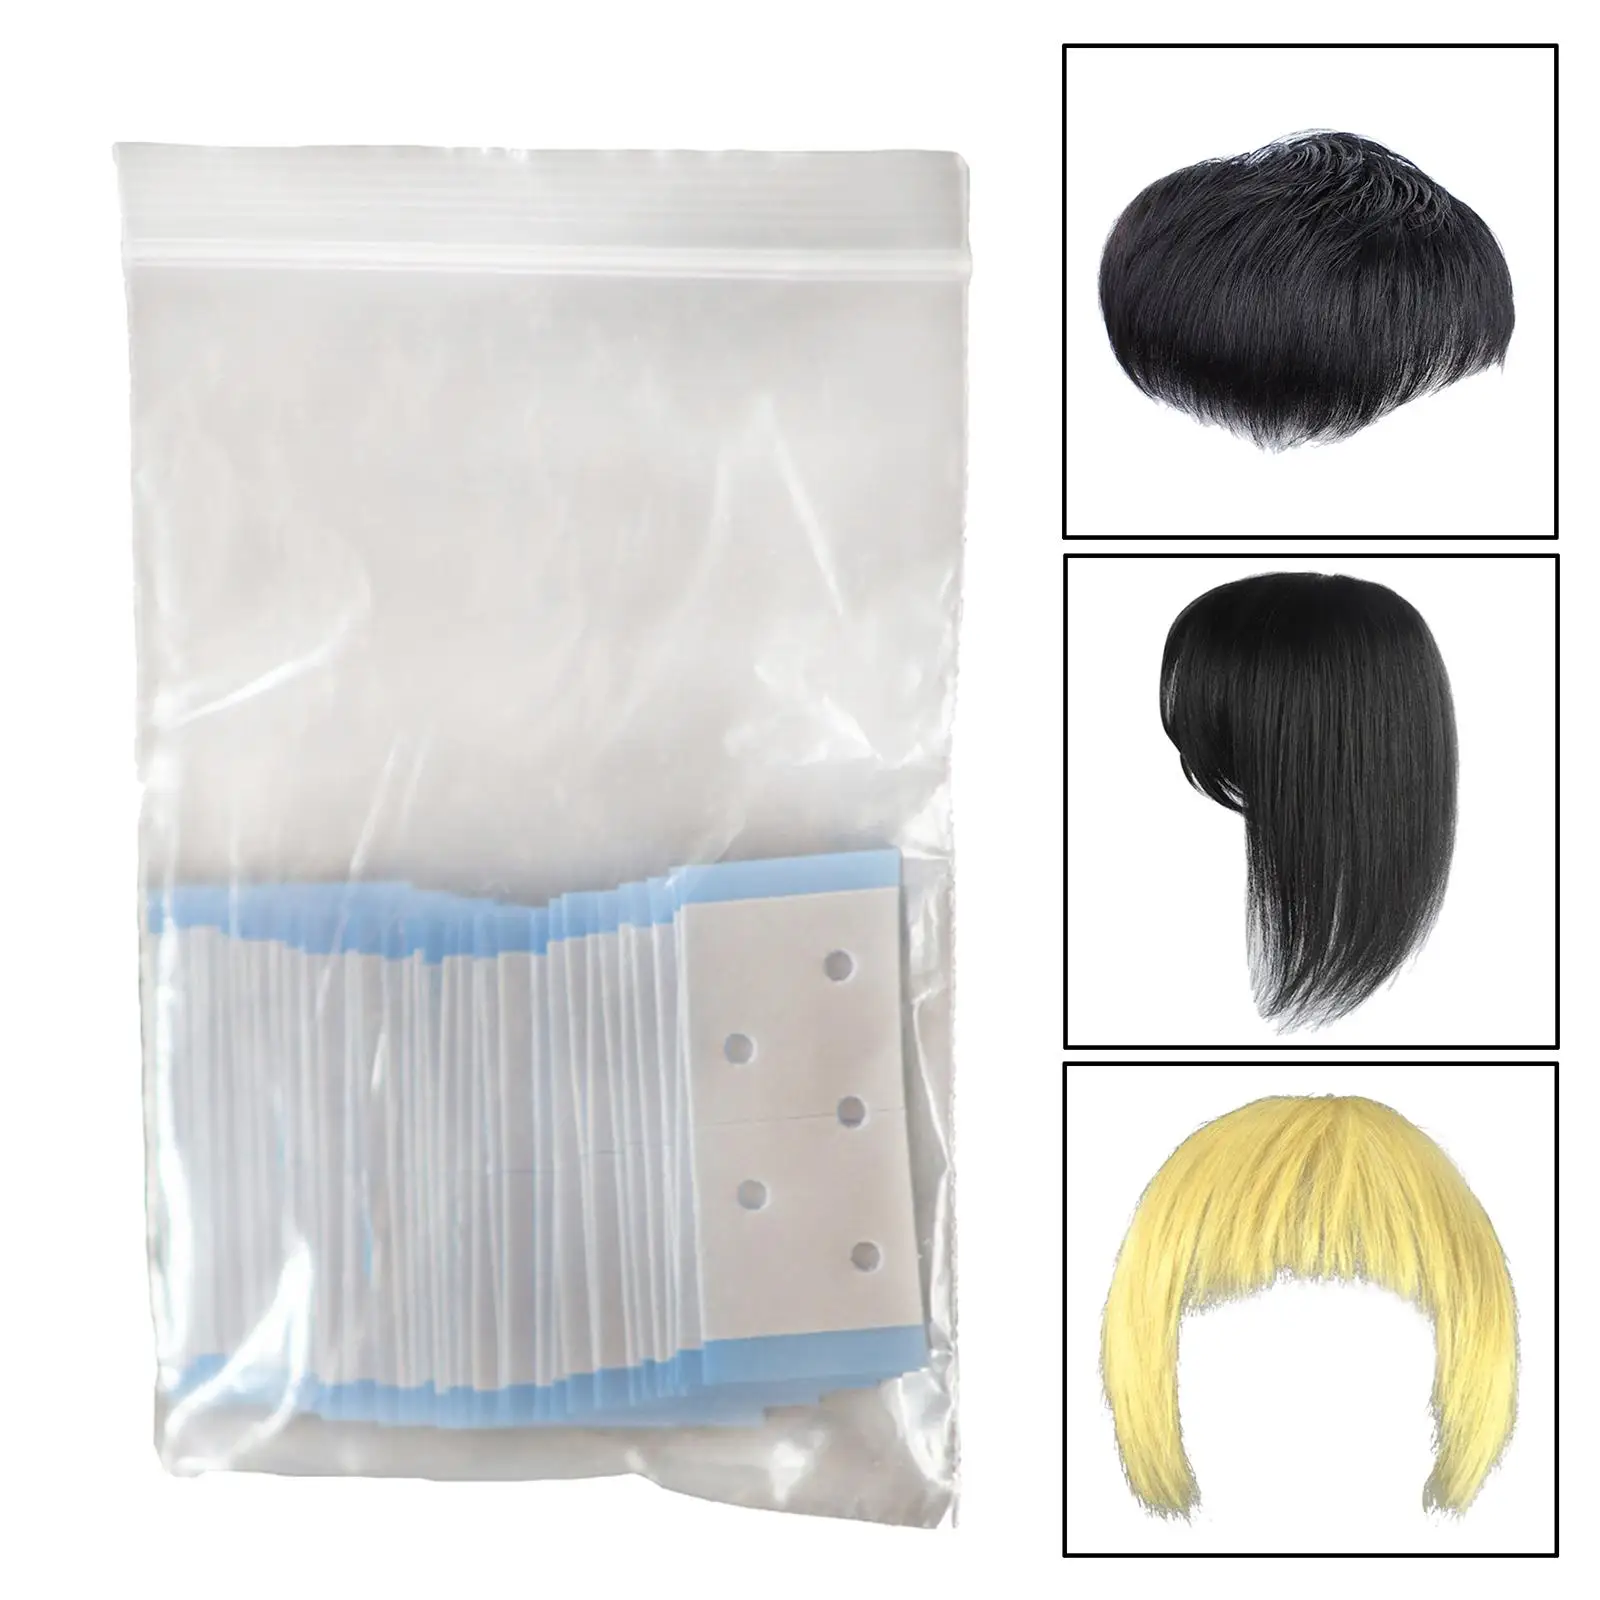 40Pcs Double Sided Hair Tape Beauty Tool Replacement Hair Extension Tape for Wigs Accessories Hair Extensions Tool